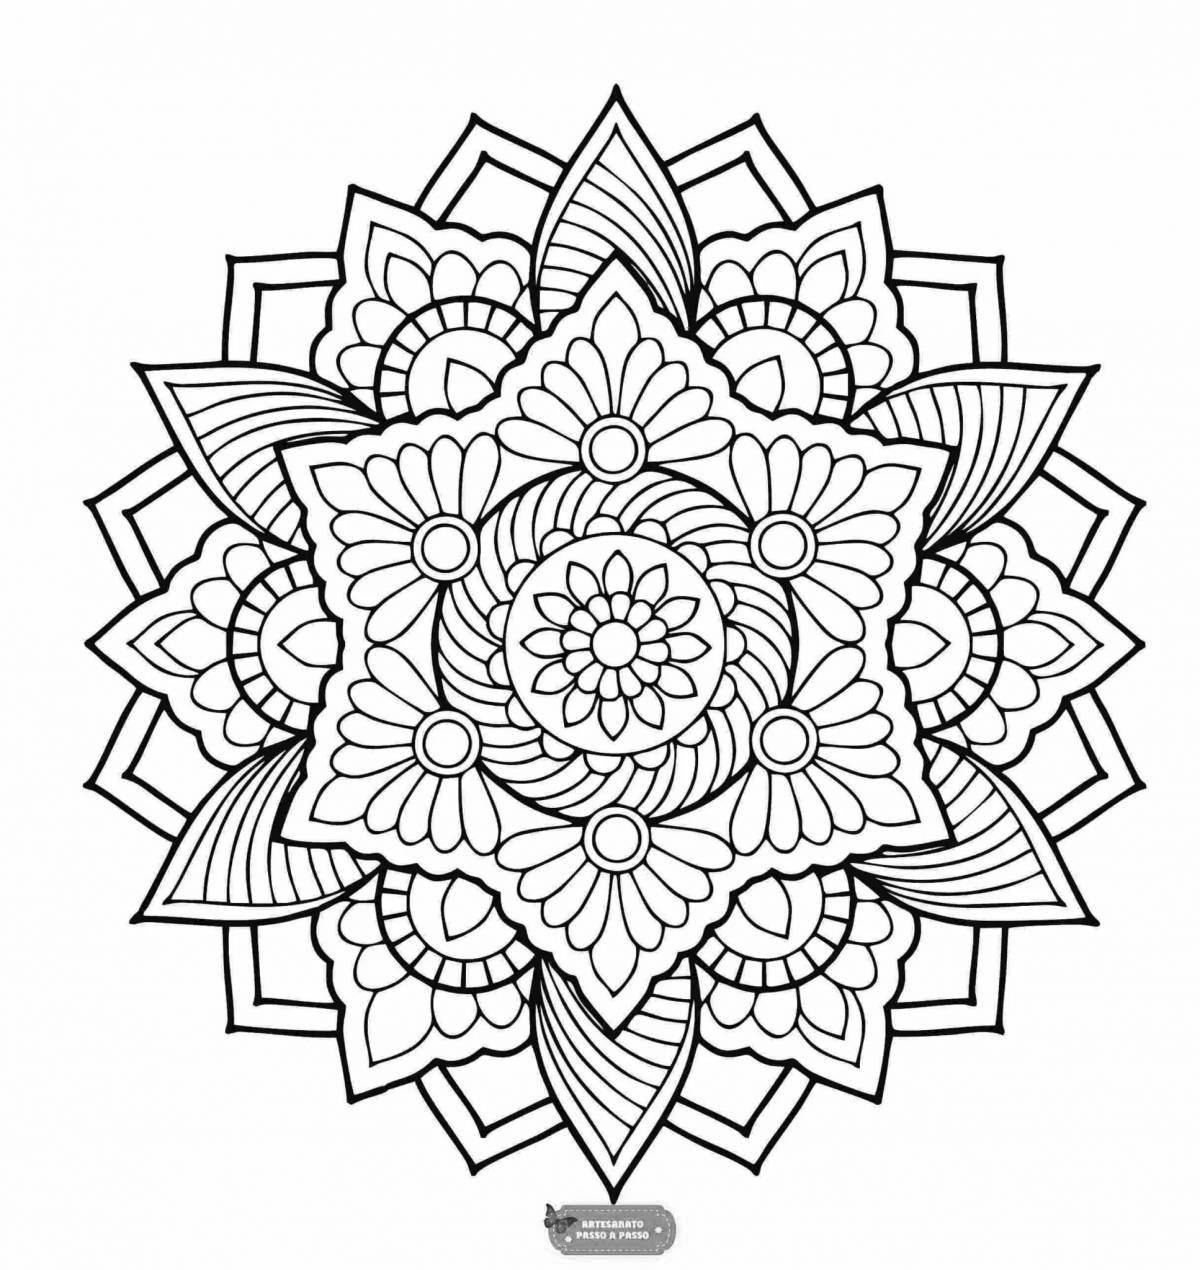 Radiant x antistress coloring book